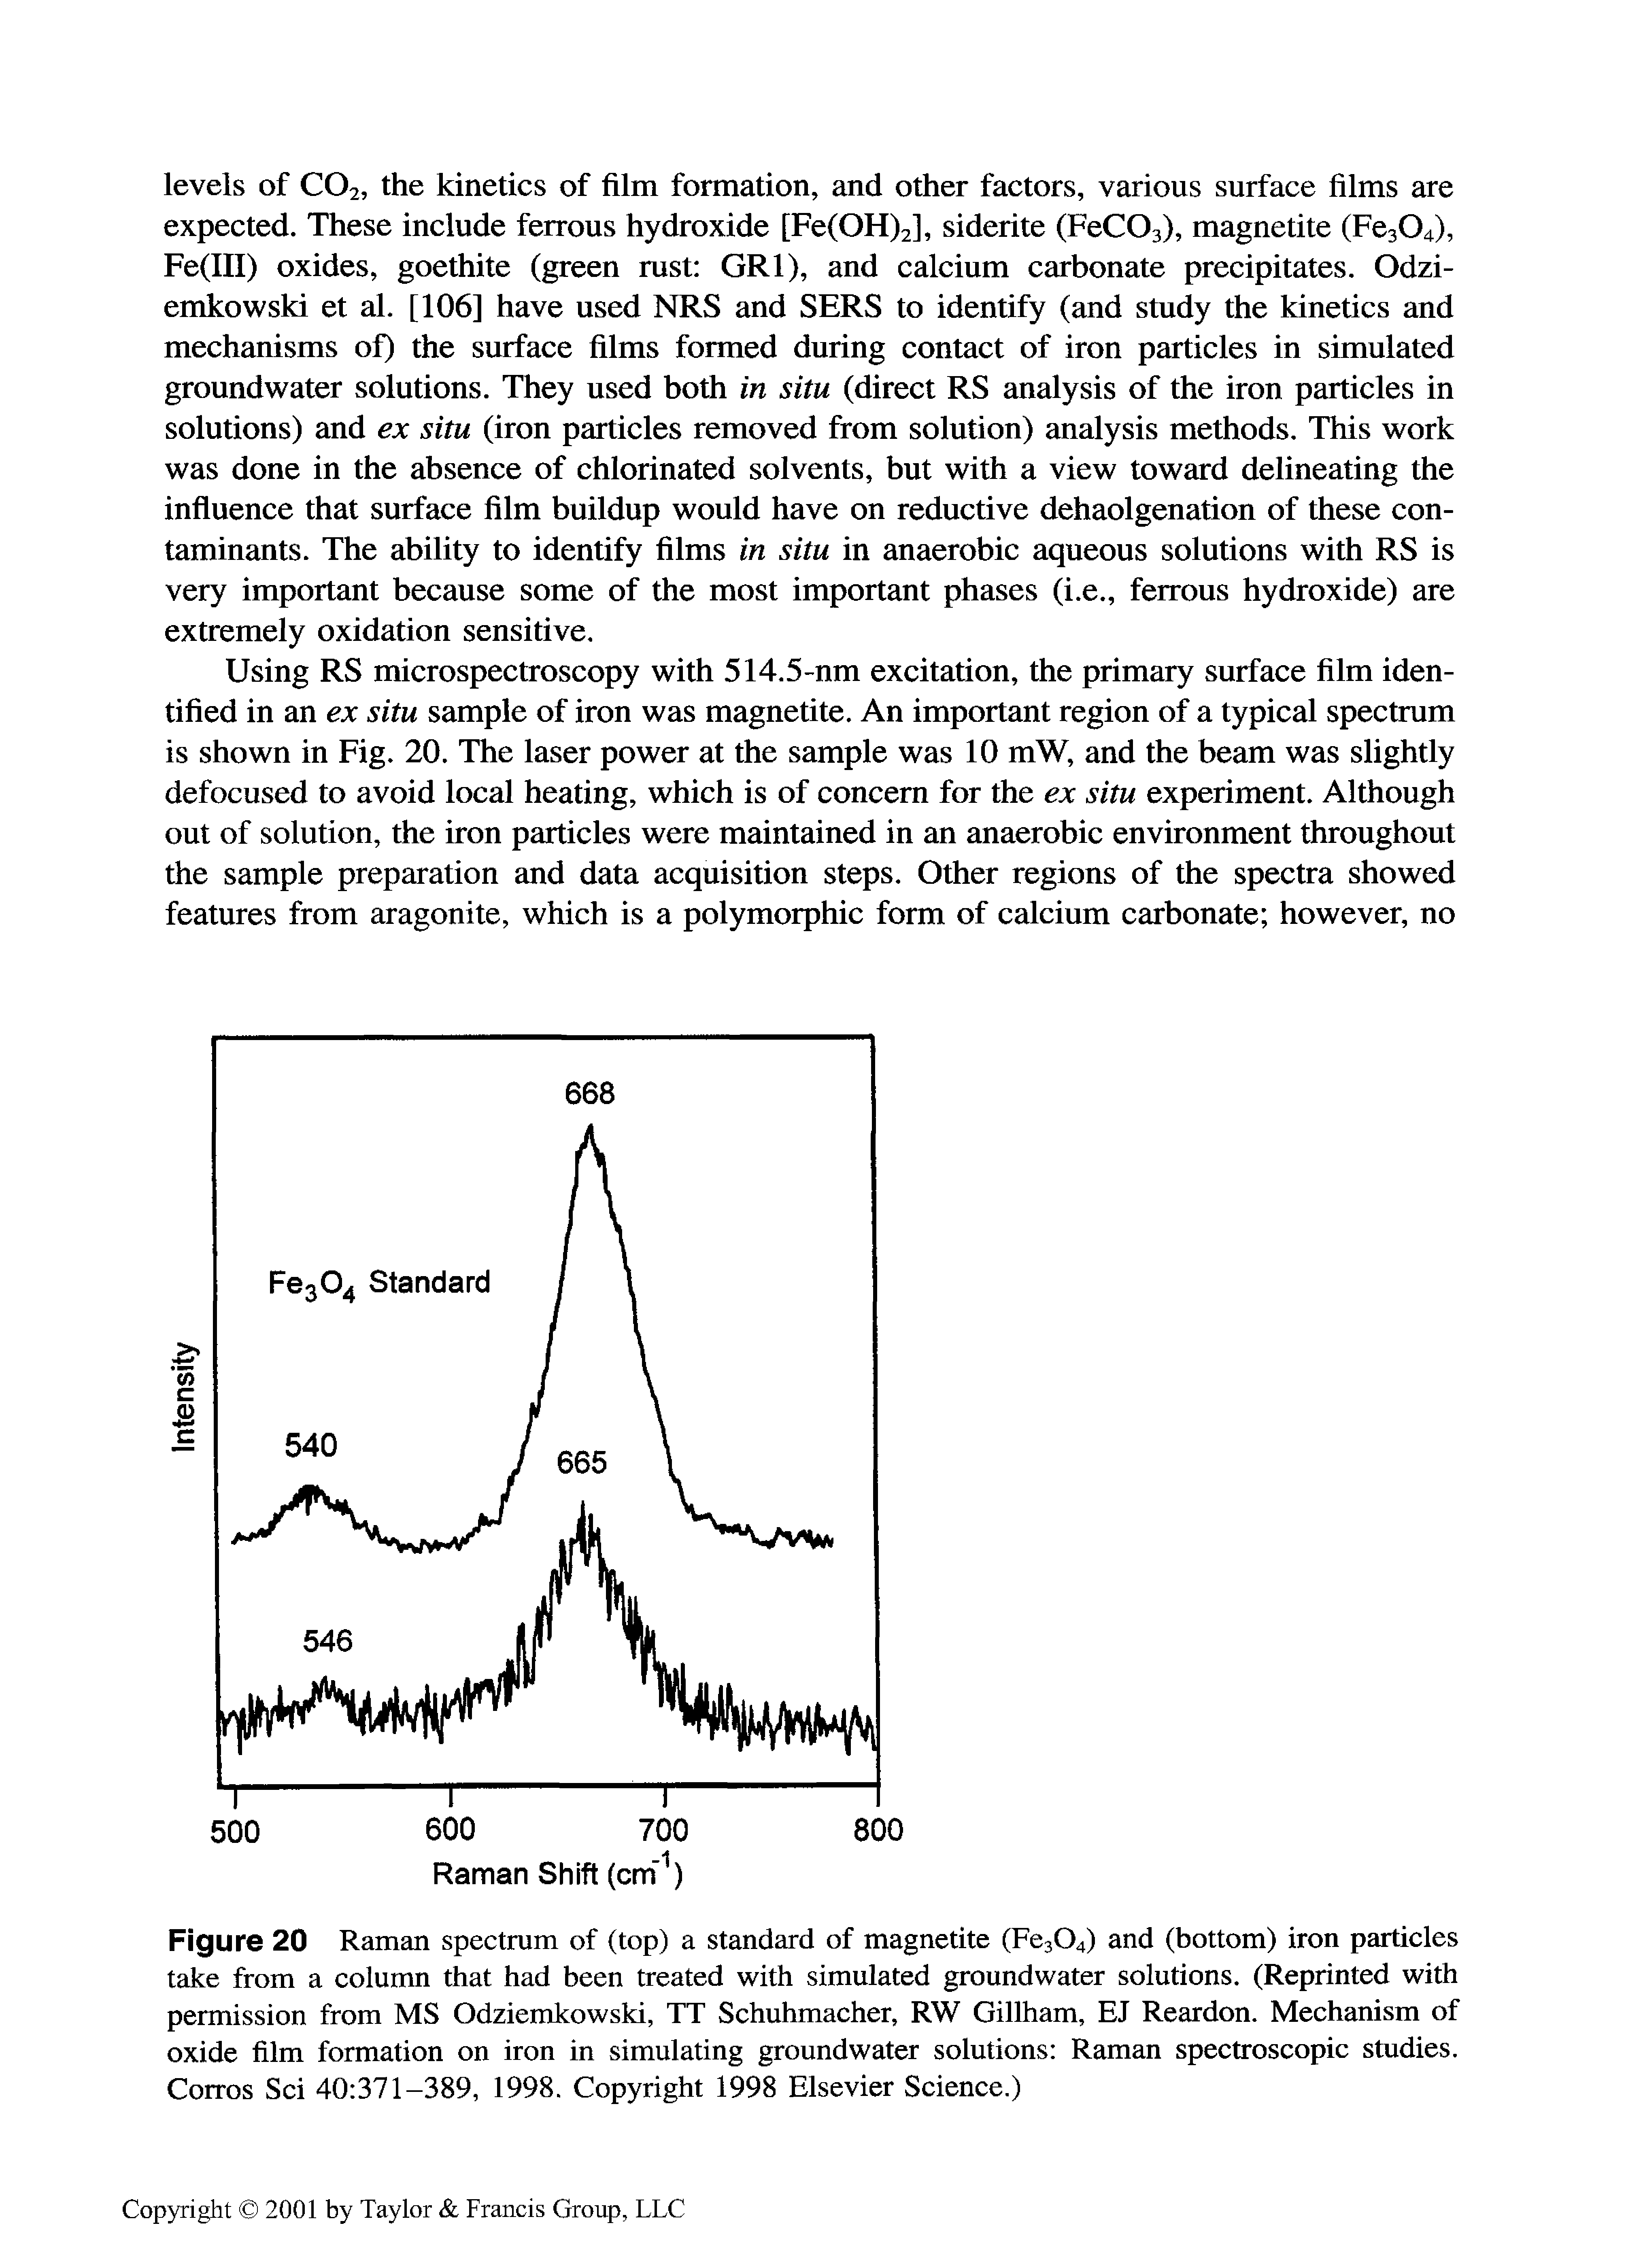 Figure 20 Raman spectrum of (top) a standard of magnetite (Fc304) and (bottom) iron particles take from a column that had been treated with simulated groundwater solutions. (Reprinted with permission from MS Odziemkowski, TT Schuhmacher, RW Gillham, EJ Reardon. Mechanism of oxide film formation on iron in simulating groundwater solutions Raman spectroscopic studies. Corros Sci 40 371-389, 1998. Copyright 1998 Elsevier Science.)...